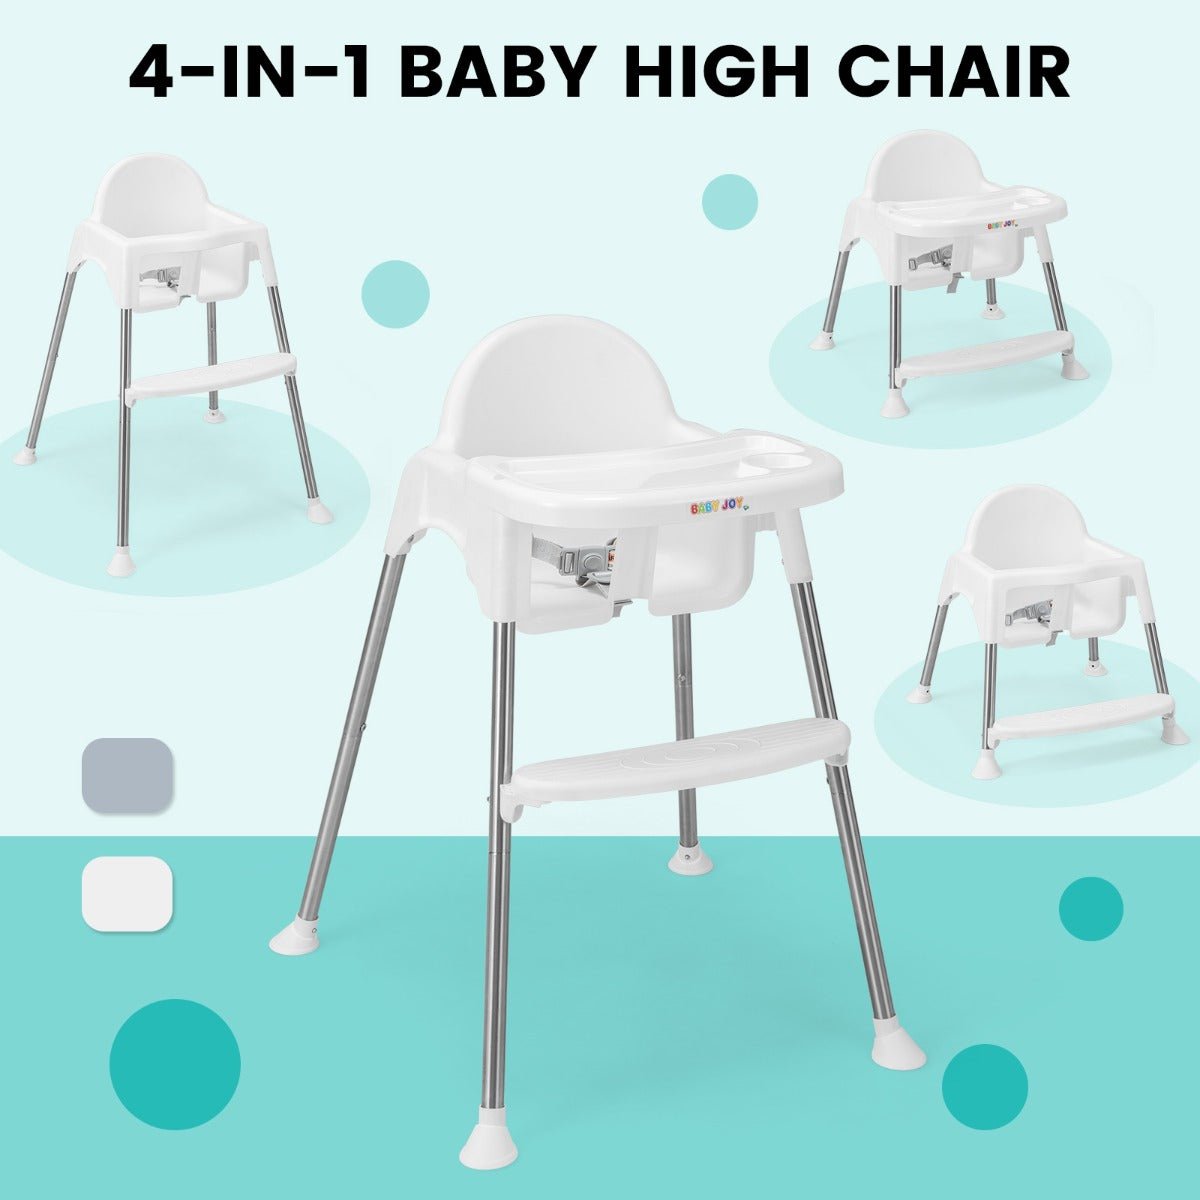 Safe and Practical: White 4-in-1 Baby High Chair with Double Tray